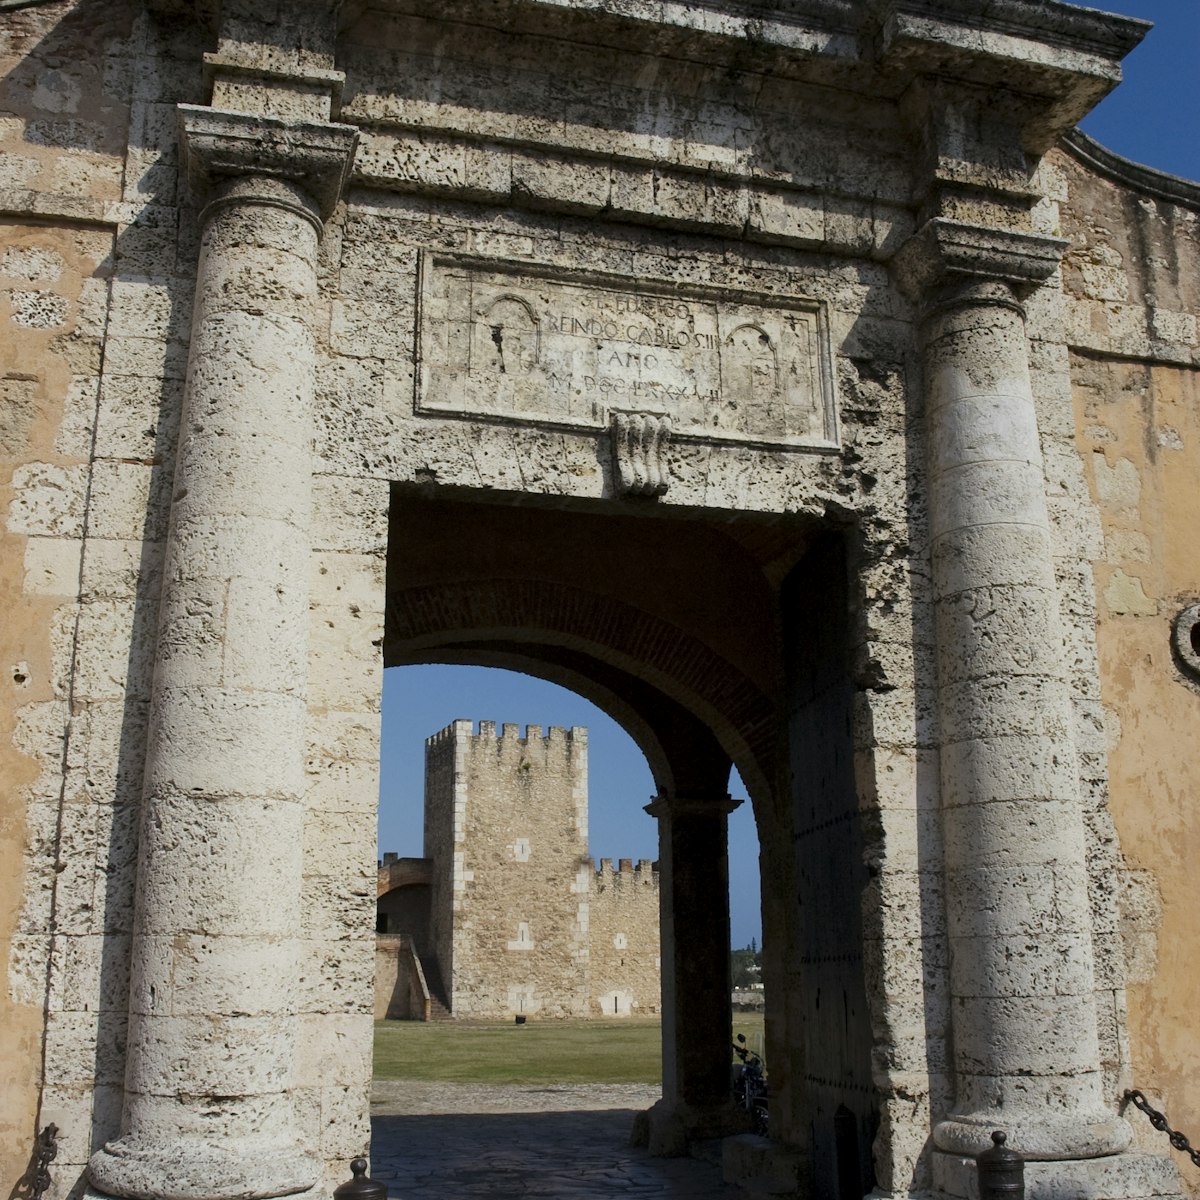 Charles III gate with Tower of Homage in background, Fortaleza Ozama.